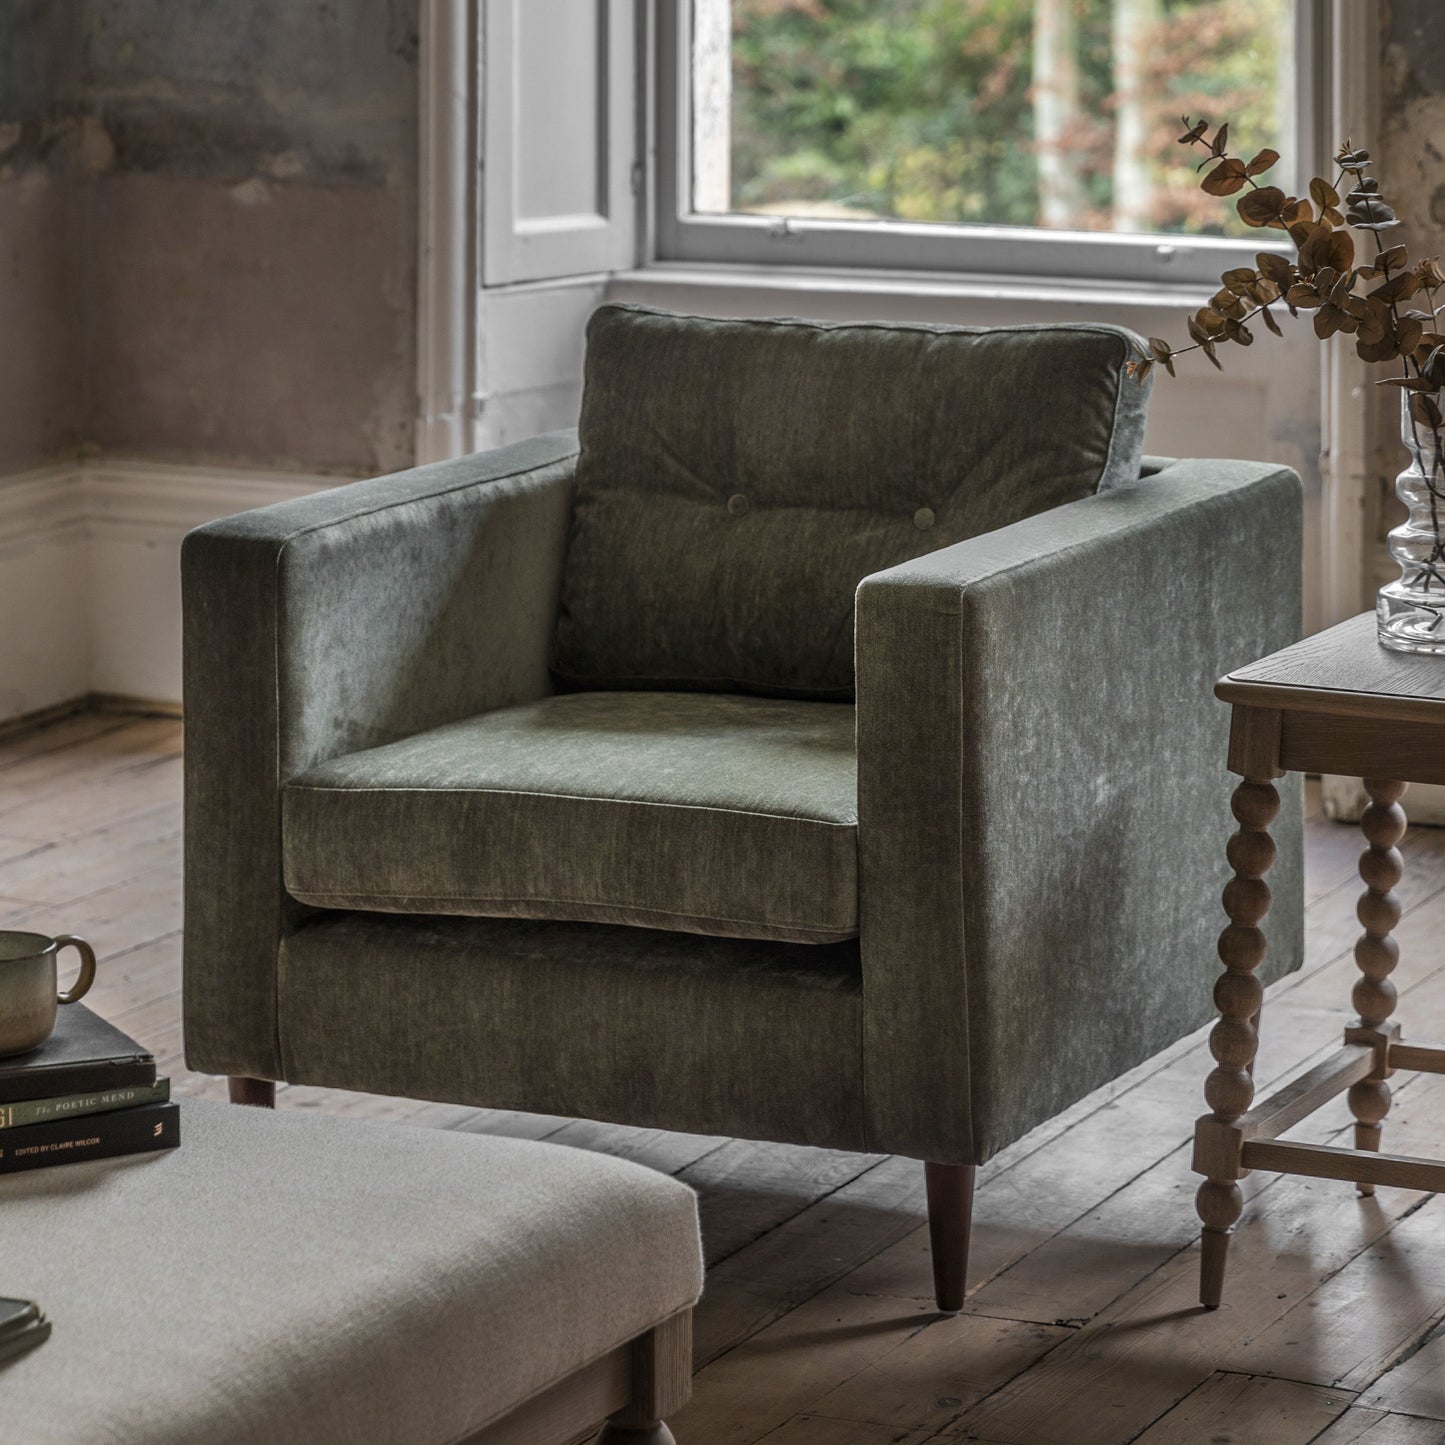 Harlow Armchair in Forest